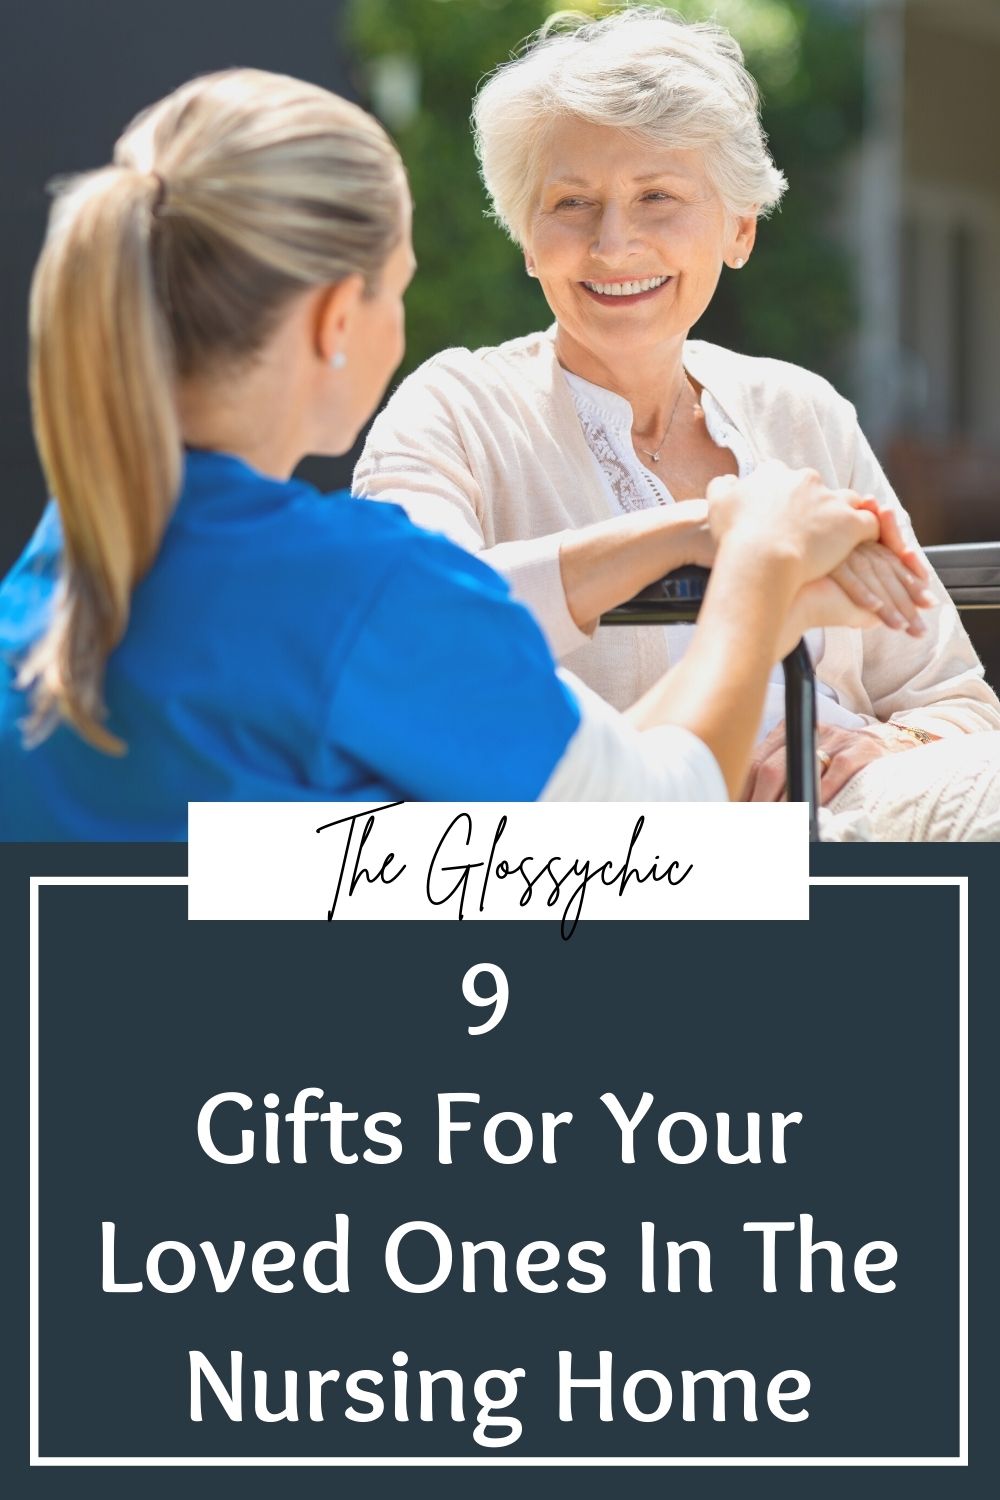 9 gifts for your loved ones in the nursing home